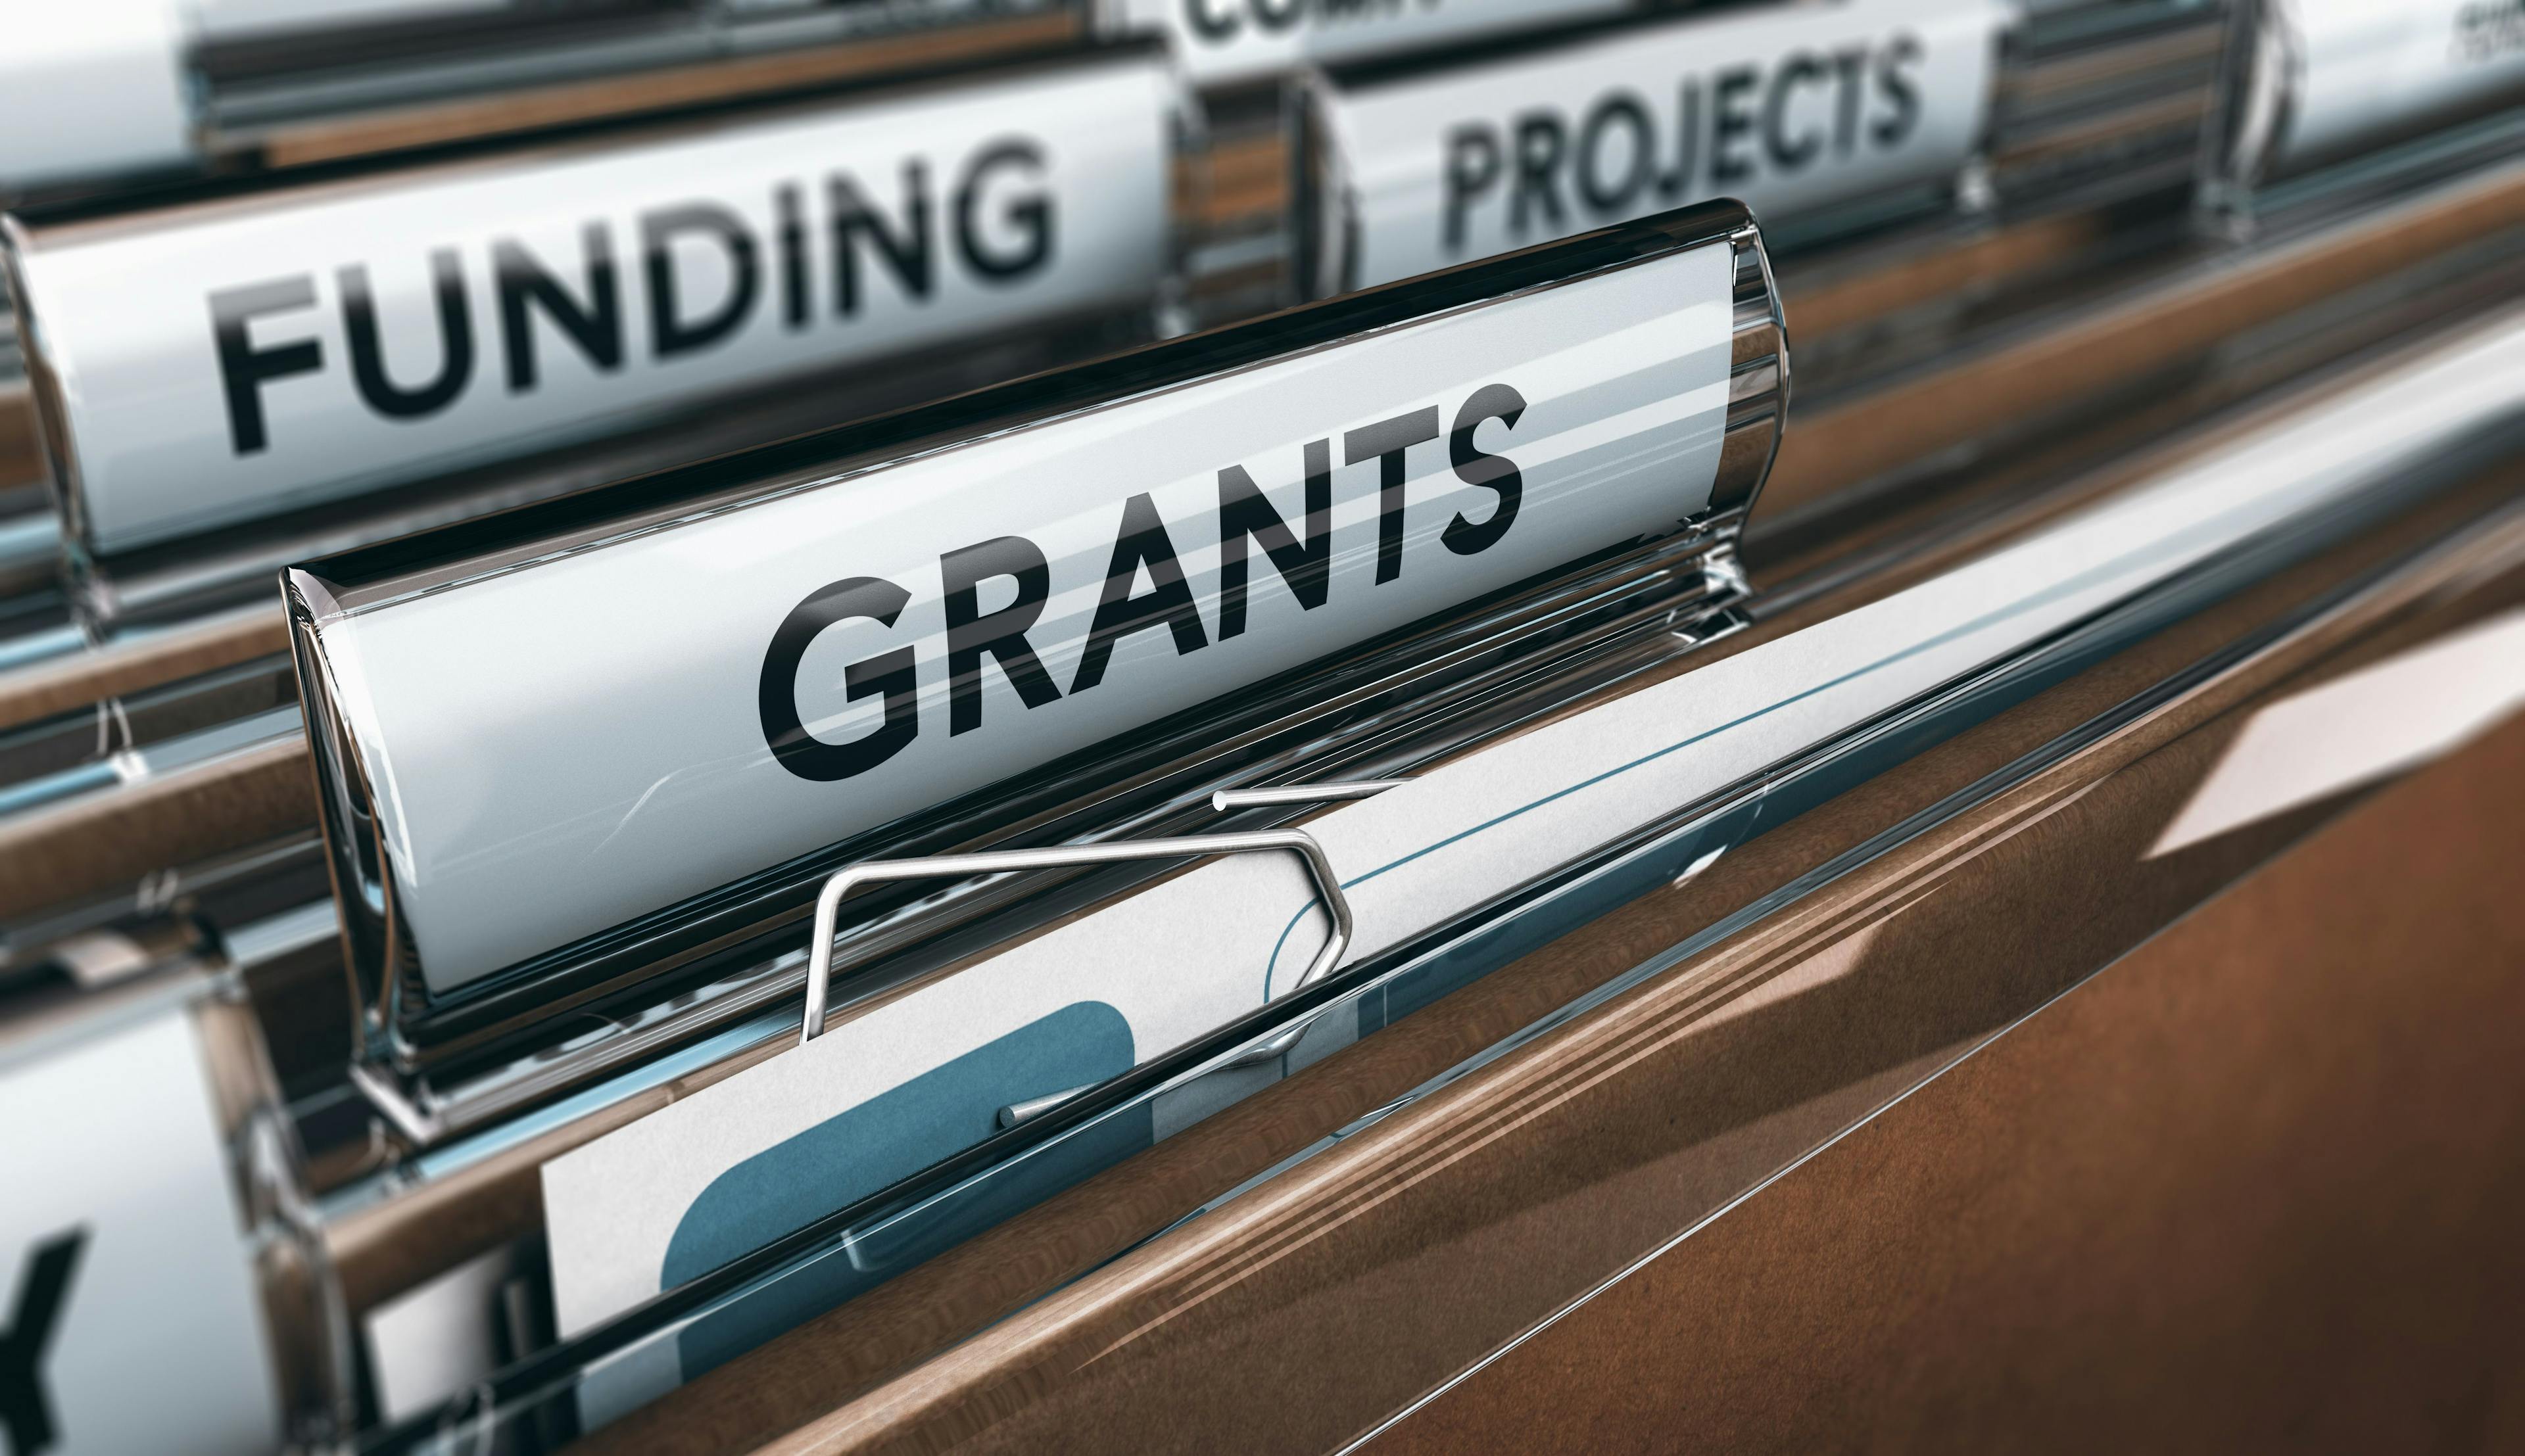 Funding and Grants Folders | image credit: Olivier Le Moal - stock.adobe.com